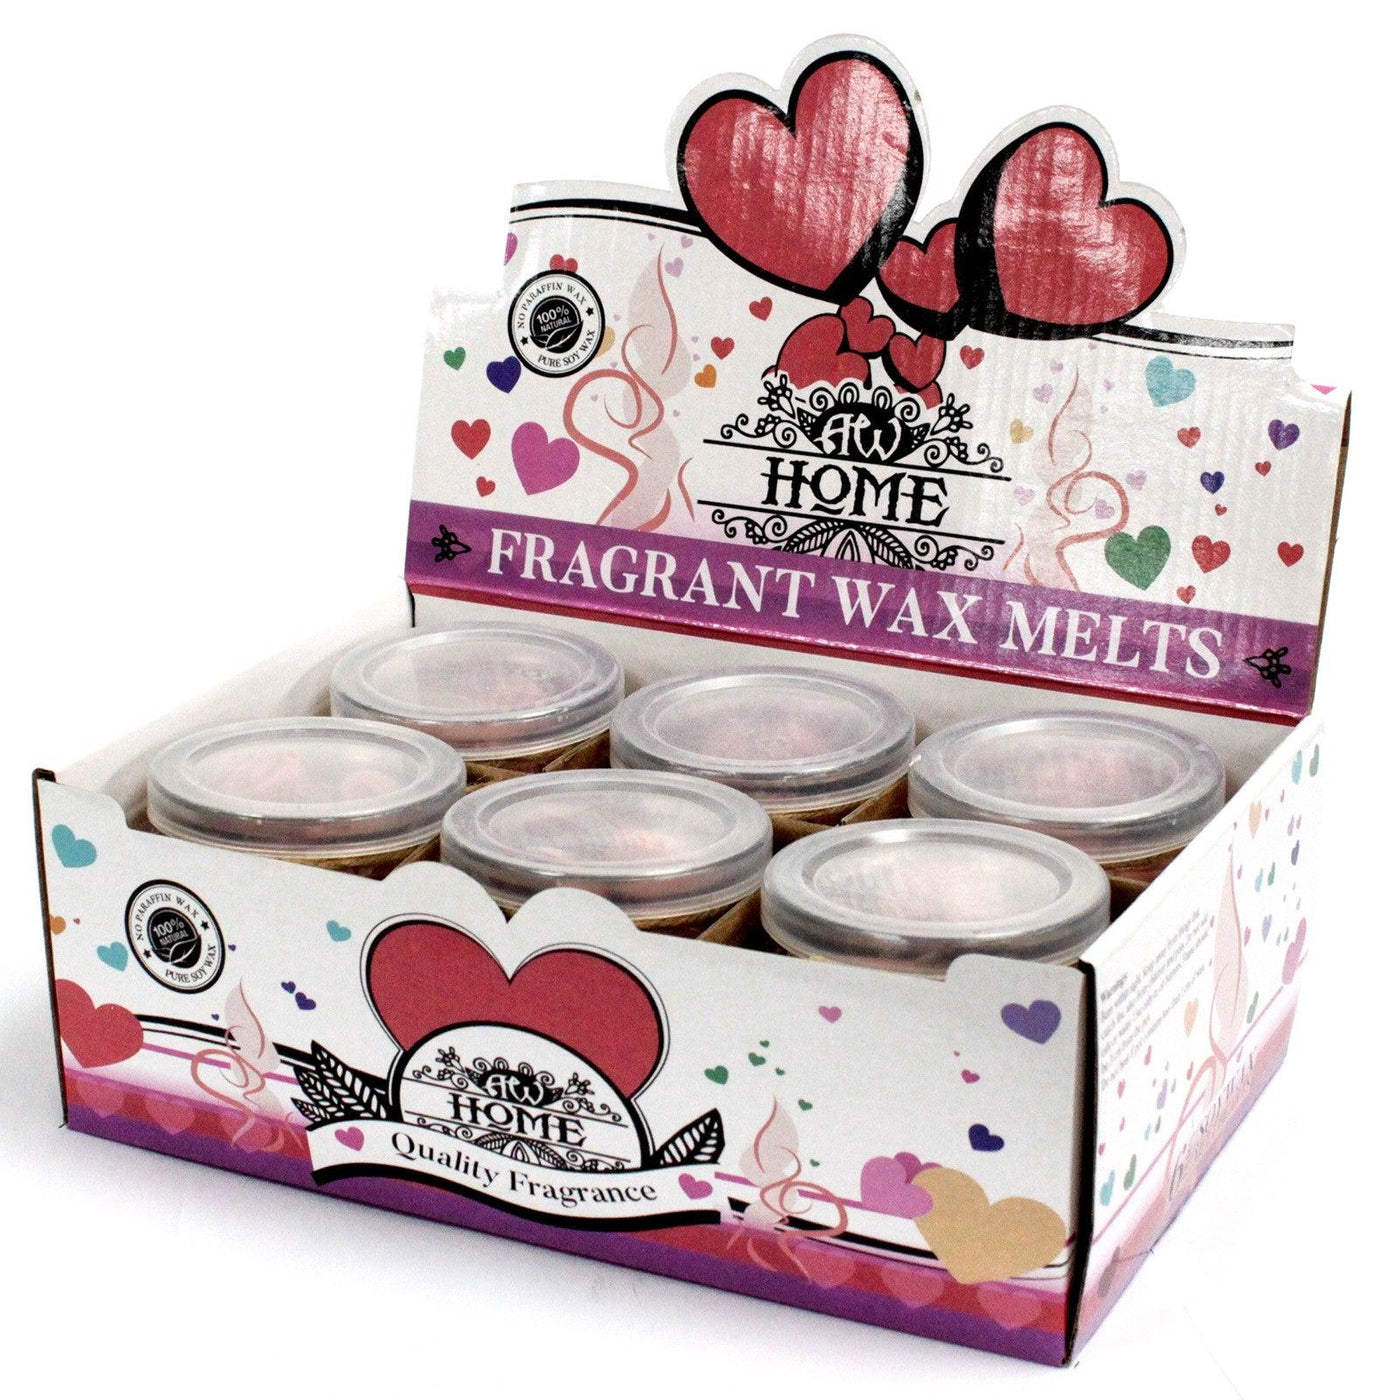 Natural Soy Fragrance Oil Heart Wax Melts - Classic Rose.